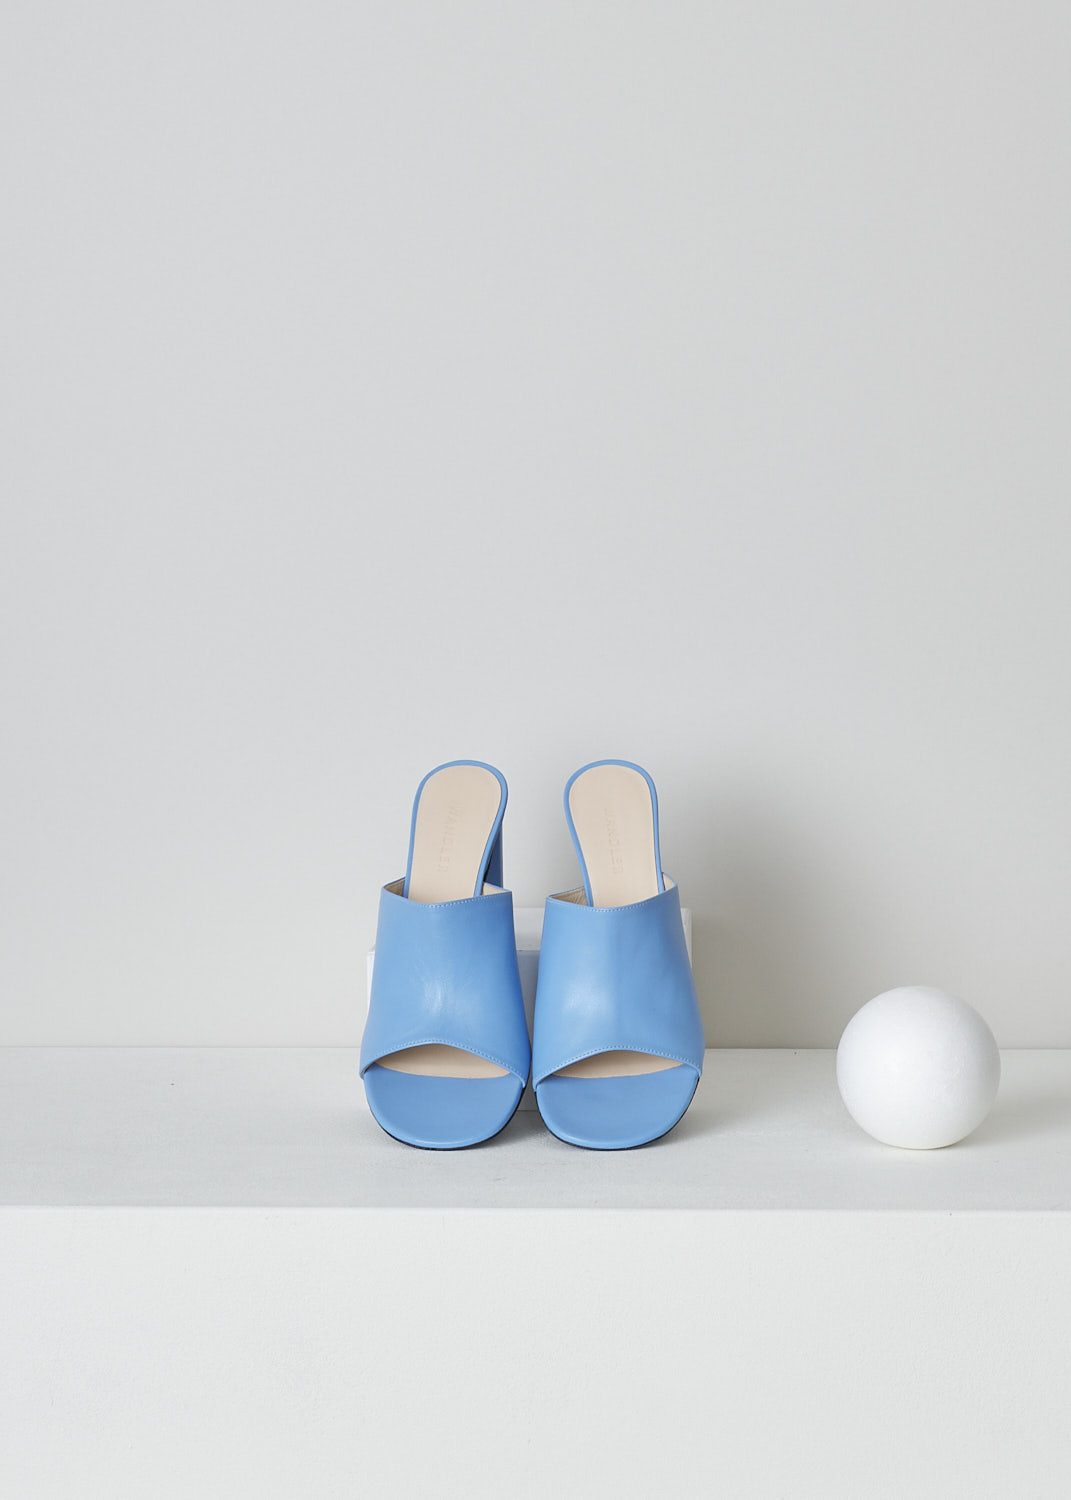 WANDLER, ANNE MULES IN AIR, 22202_721204_2801, Blue, Top, These light blue leather slip-on sandals have a broad strap across the vamp, a rounded open toe and a rectangular block heel.
  
